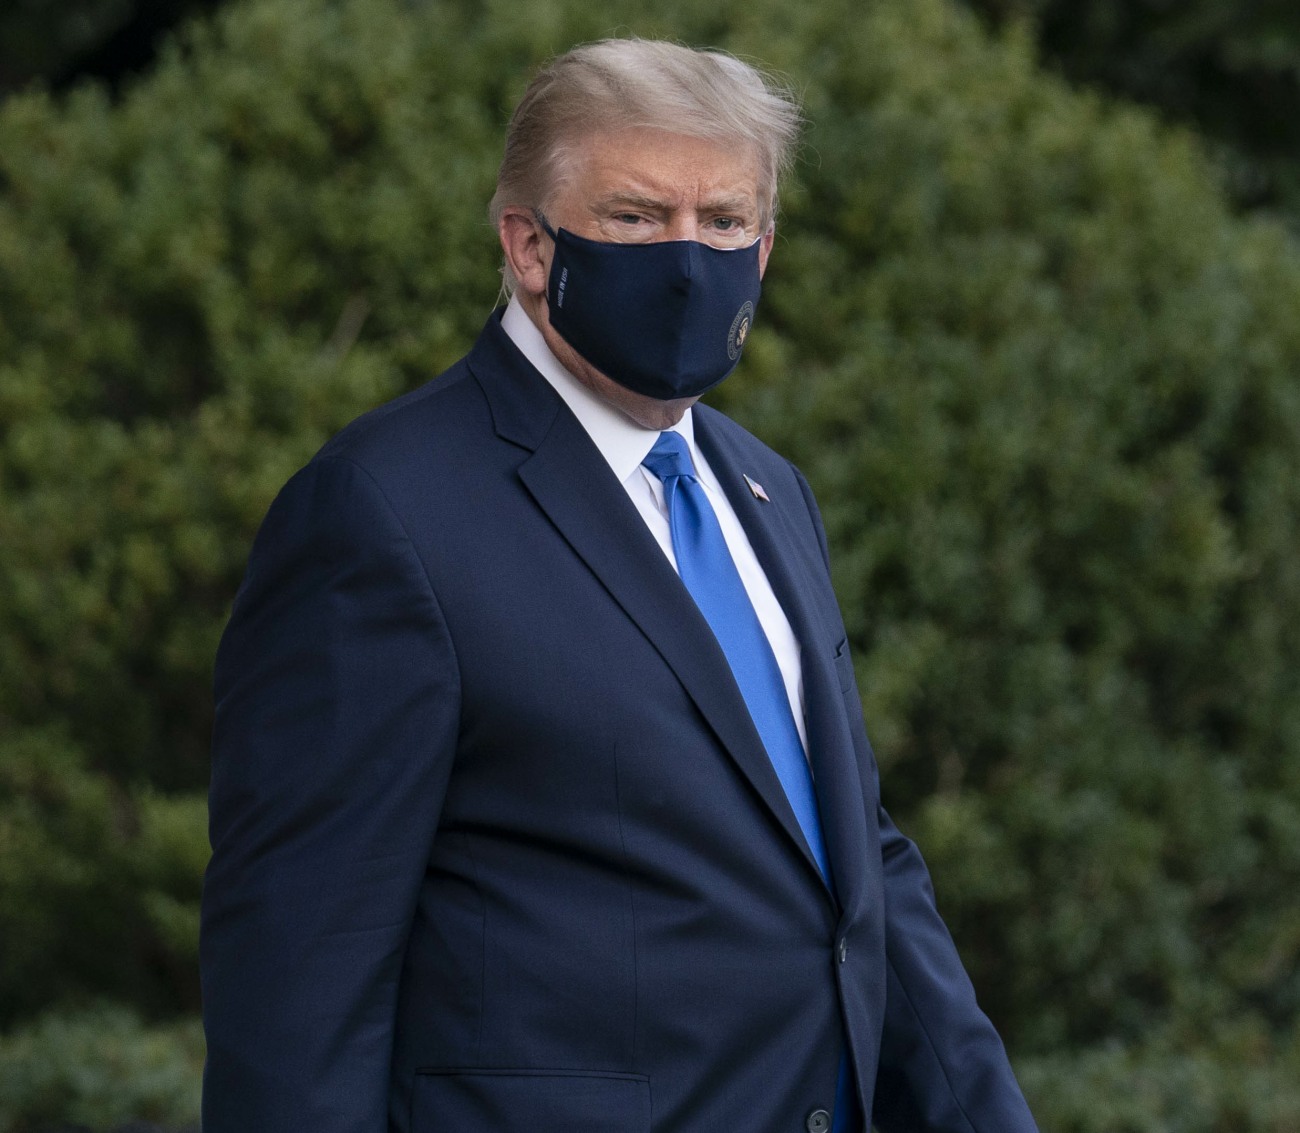 President Trump Departs the White House for Hospital